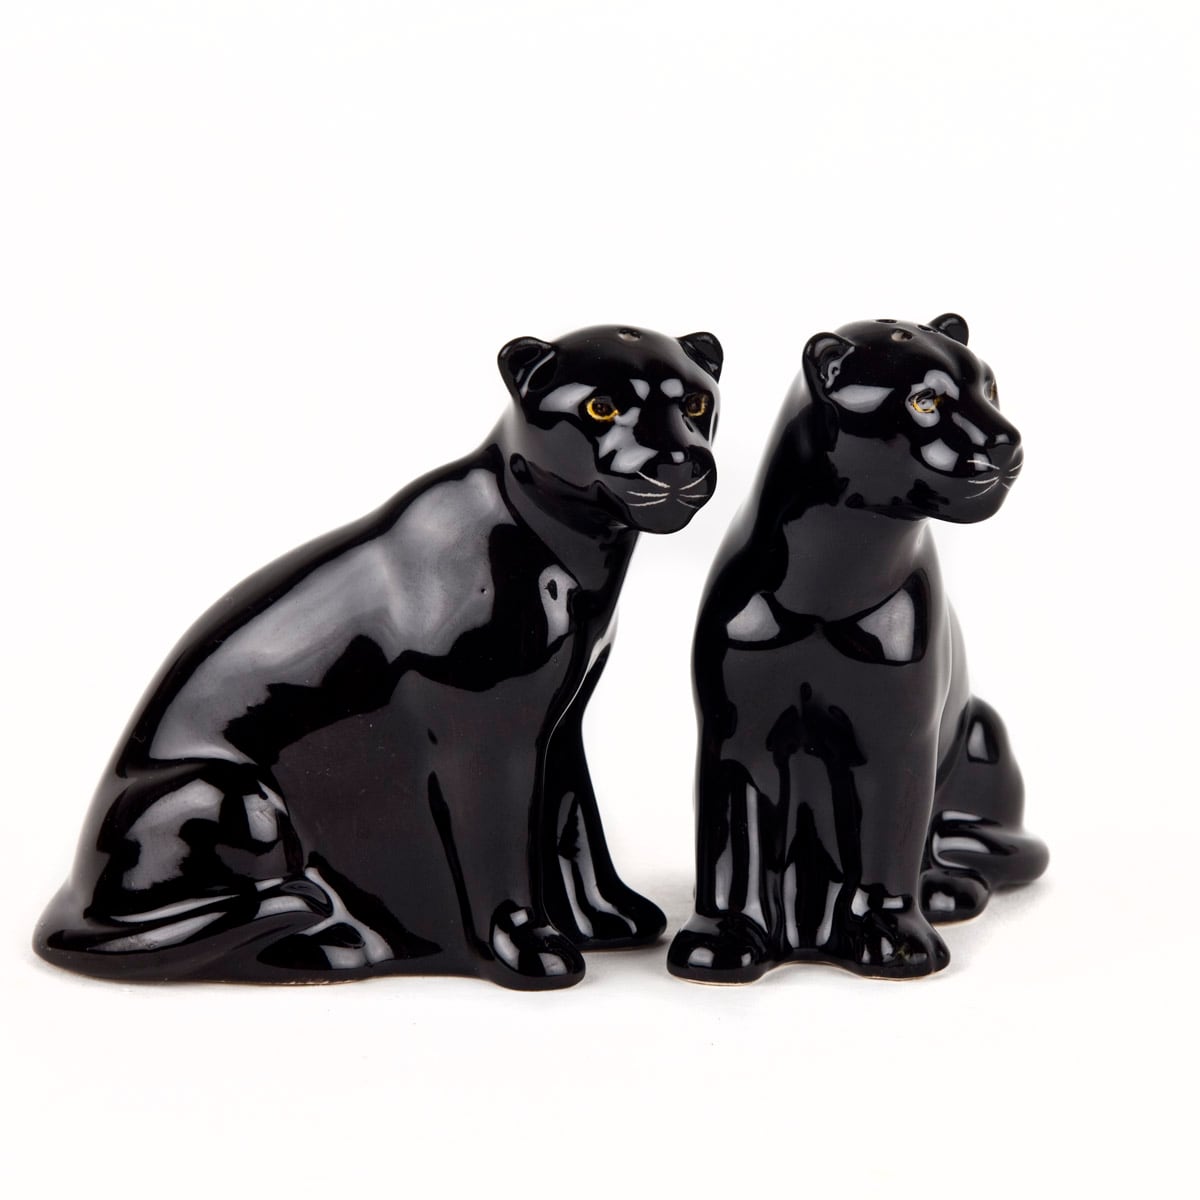 Salt and Pepper Shaker Panther